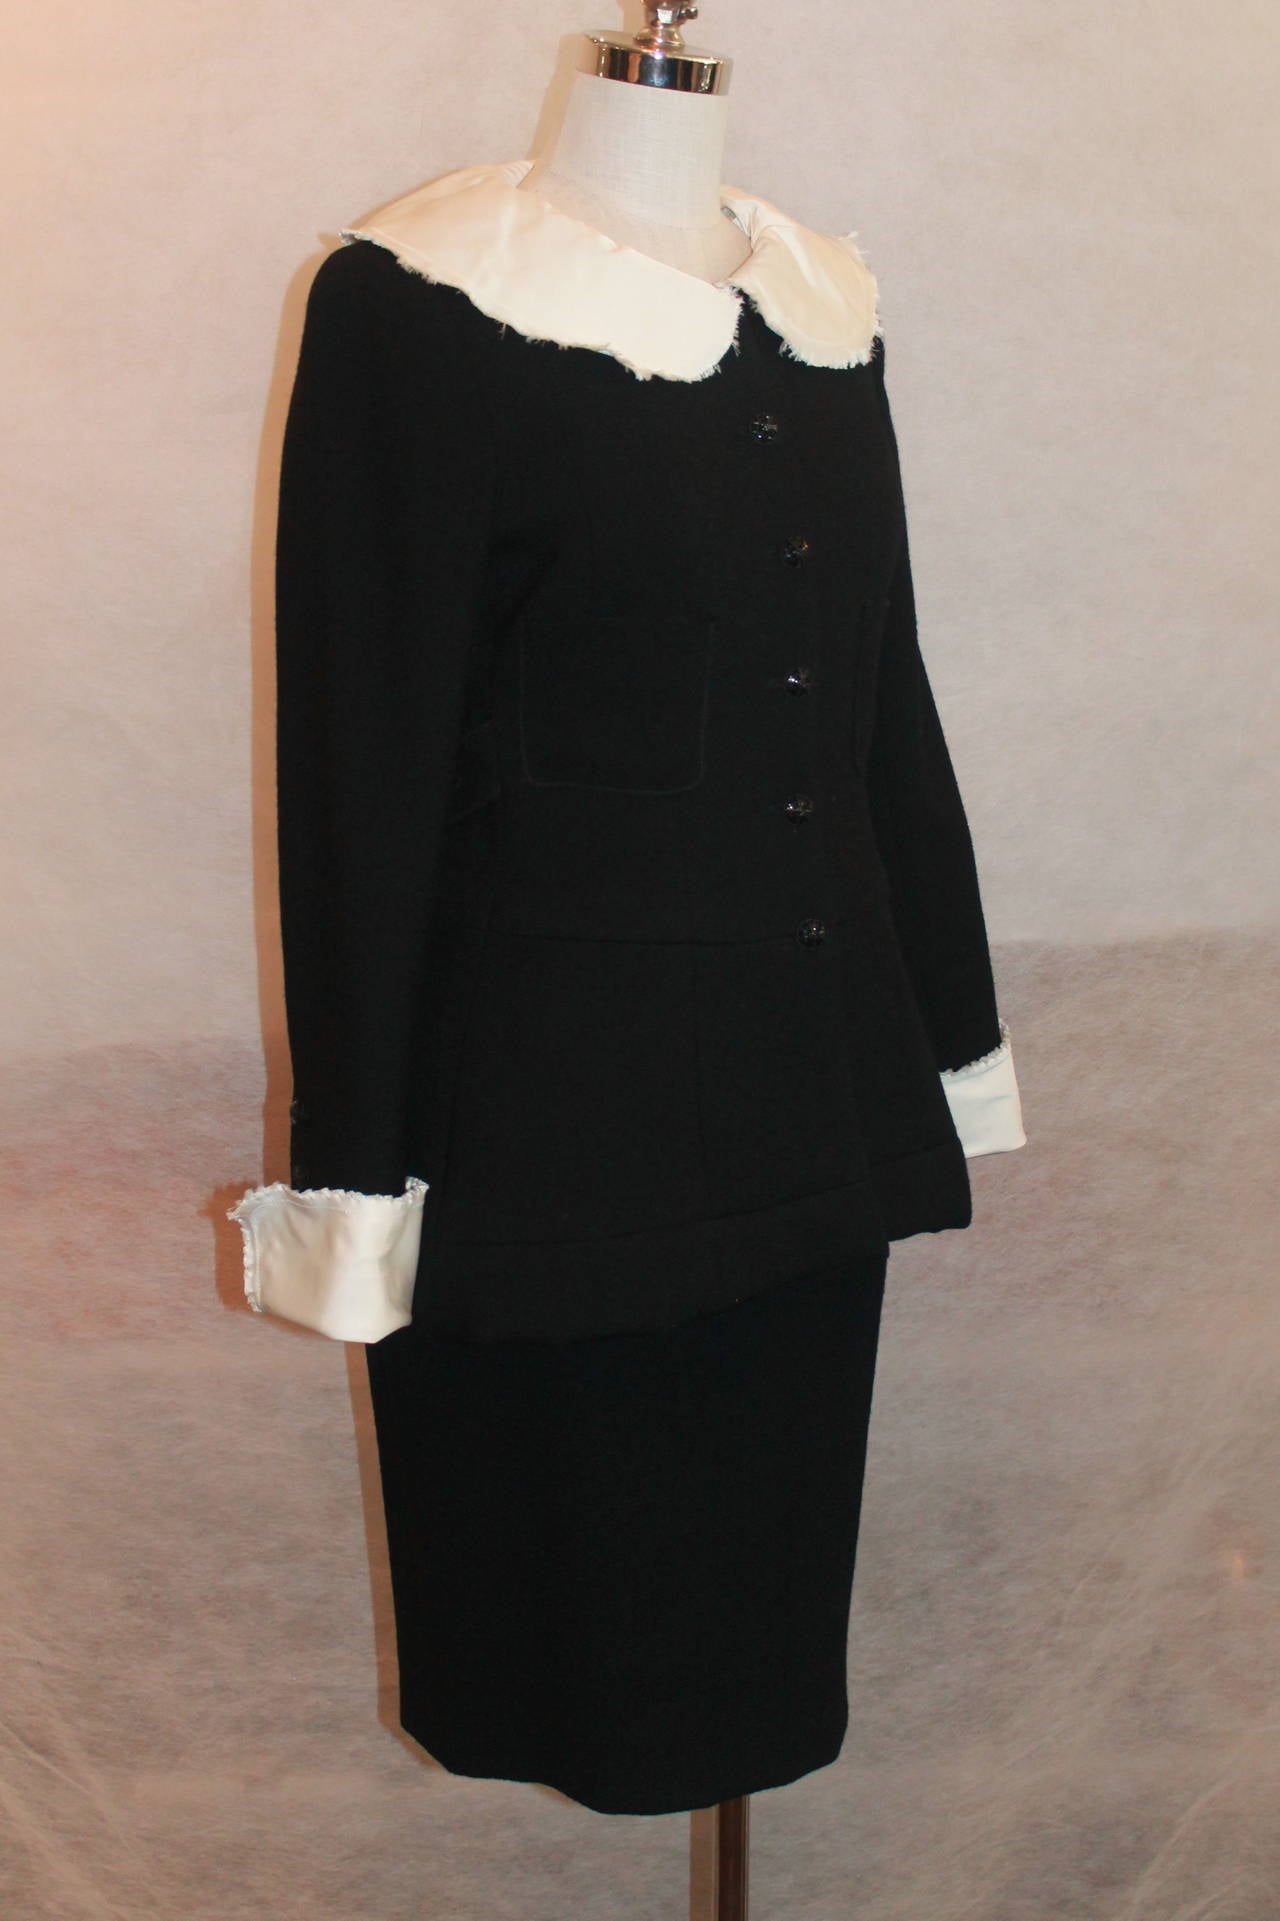 Chanel Black Wool Skirt Suit w/ removable white collar and cuffs-38-2008 collection. This very special skirt suit has white silk removable collar and cuffs w/ fringe on the ends, spectacular black w/ crystal detail buttons, 2 front pockets, the